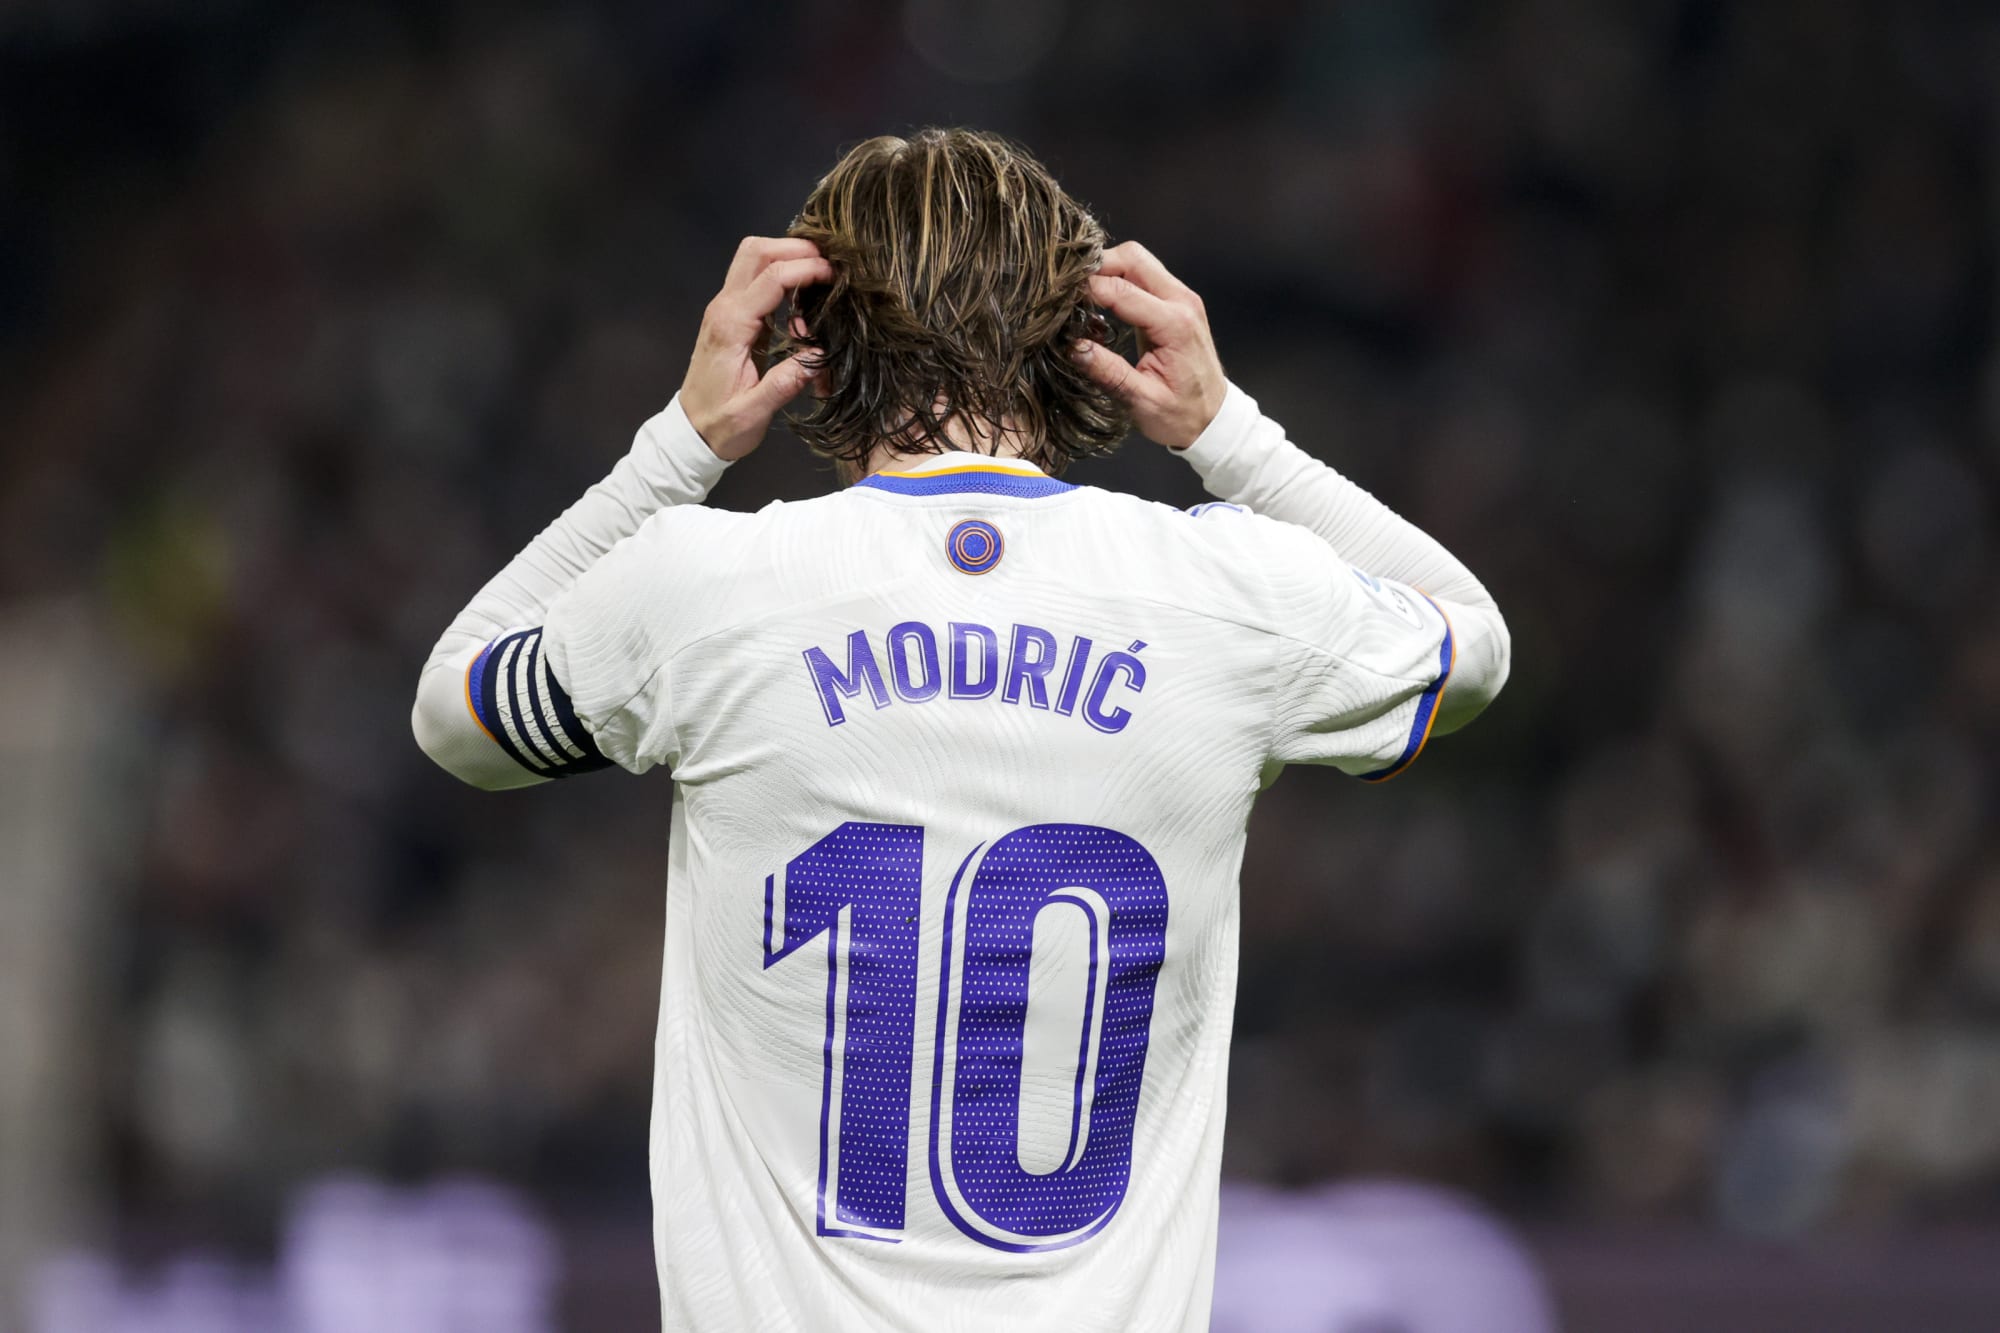  Real Madrid: In recognition of one of the GOATs, the tireless Luka Modric